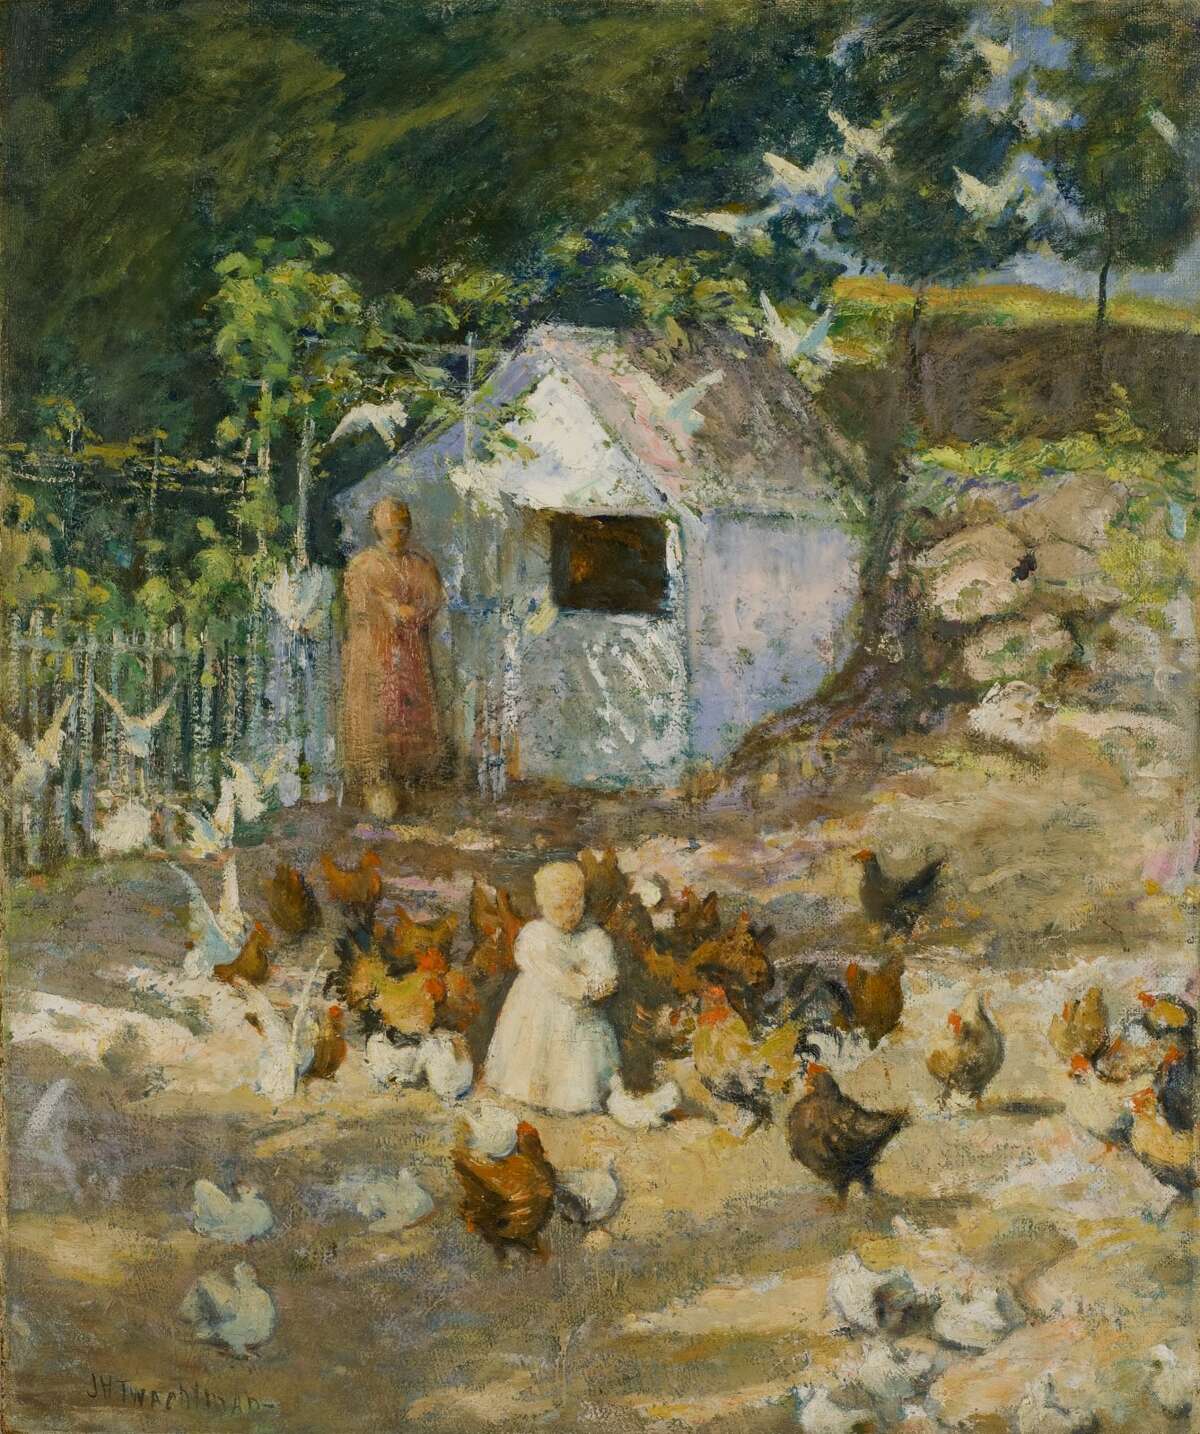 John Henry Twachtman (American, 1853-1902), Barnyard, ca. 1896–97. Oil on canvas. 30 × 25 inches. Florence Griswold Museum, Old Lyme, Connecticut; Gift of the Fine Arts Collection of The Hartford Steam Boiler Inspection and Insurance Company